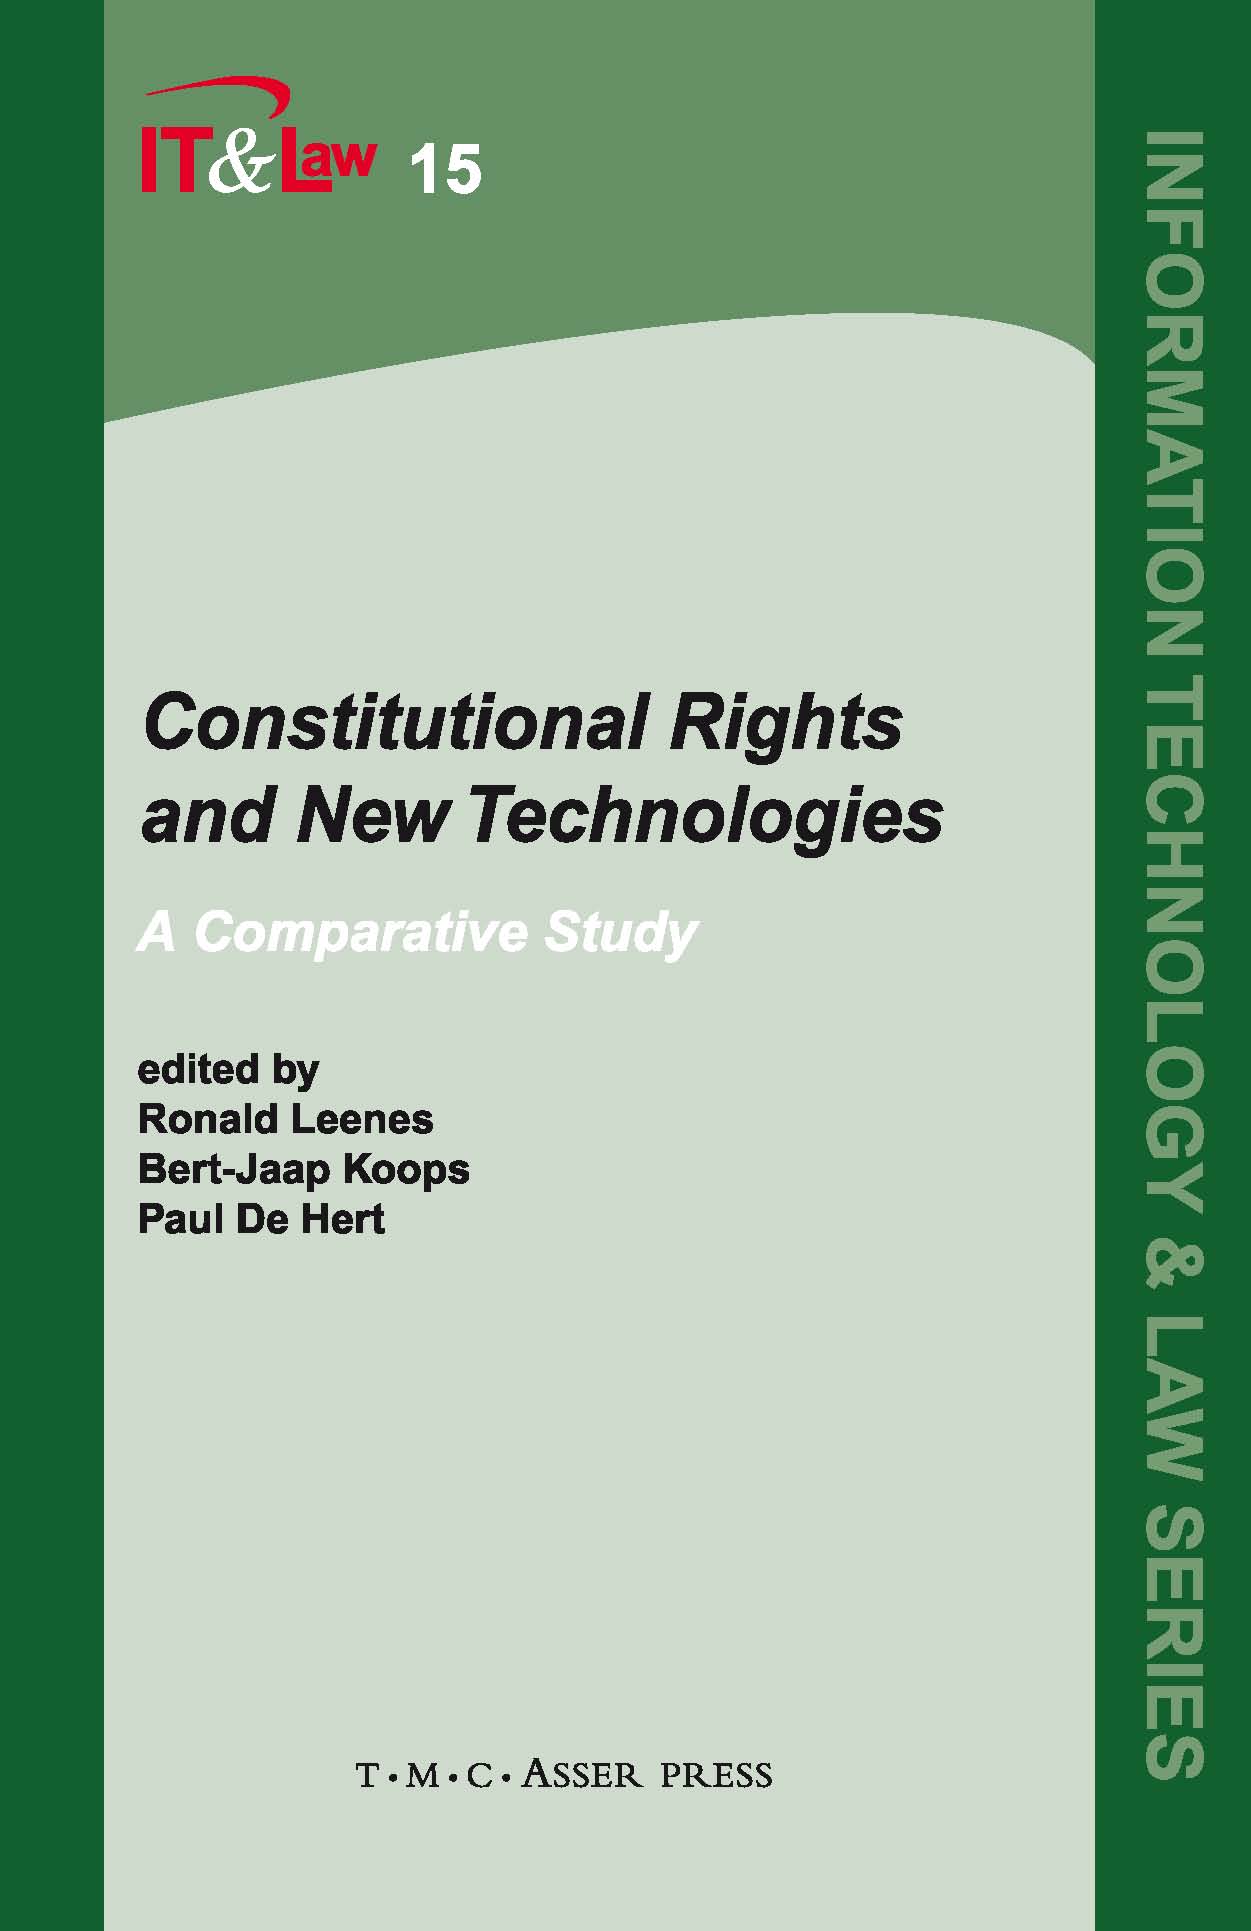 Constitutional Rights and New Technologies - A Comparative Study